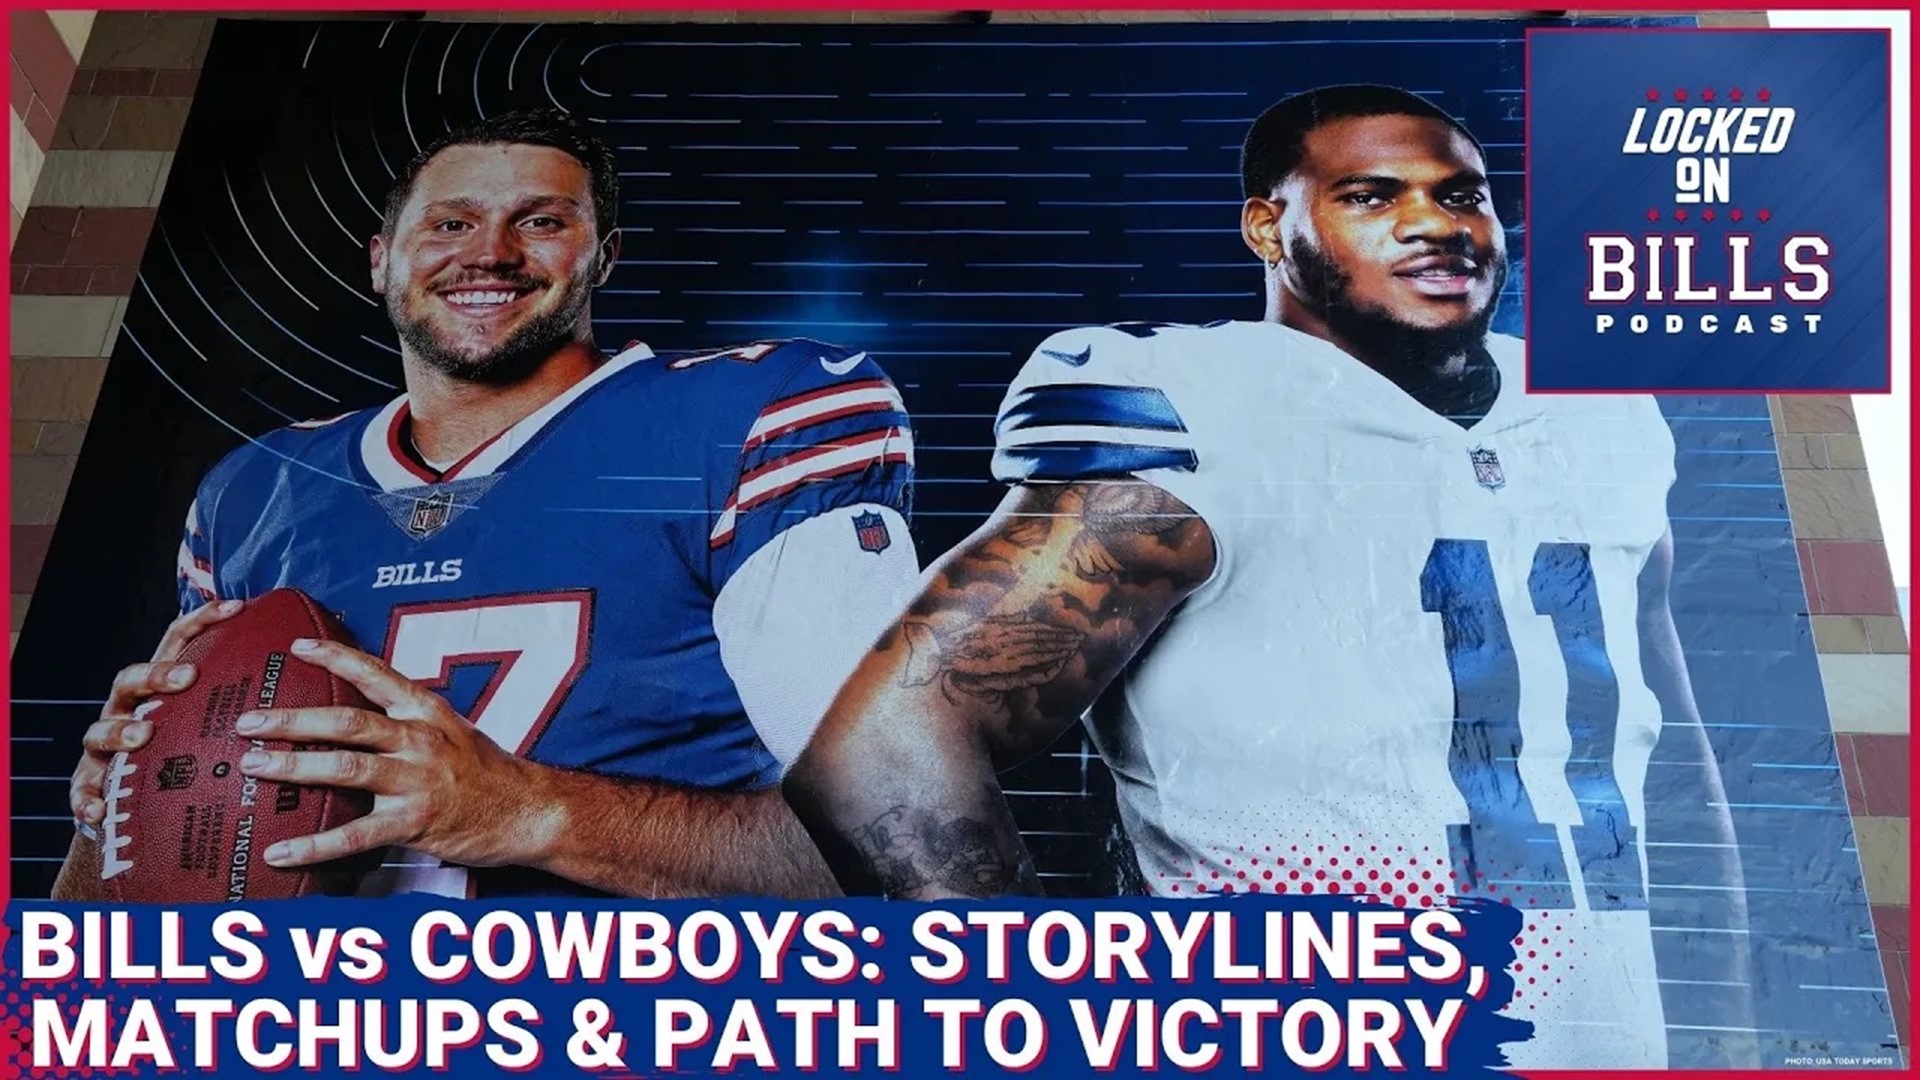 The Buffalo Bills are at home in Week 15 to host the Dallas Cowboys. On today’s episode, Joe Marino is joined by Locked On Cowboys host Marcus Mosher to discuss.